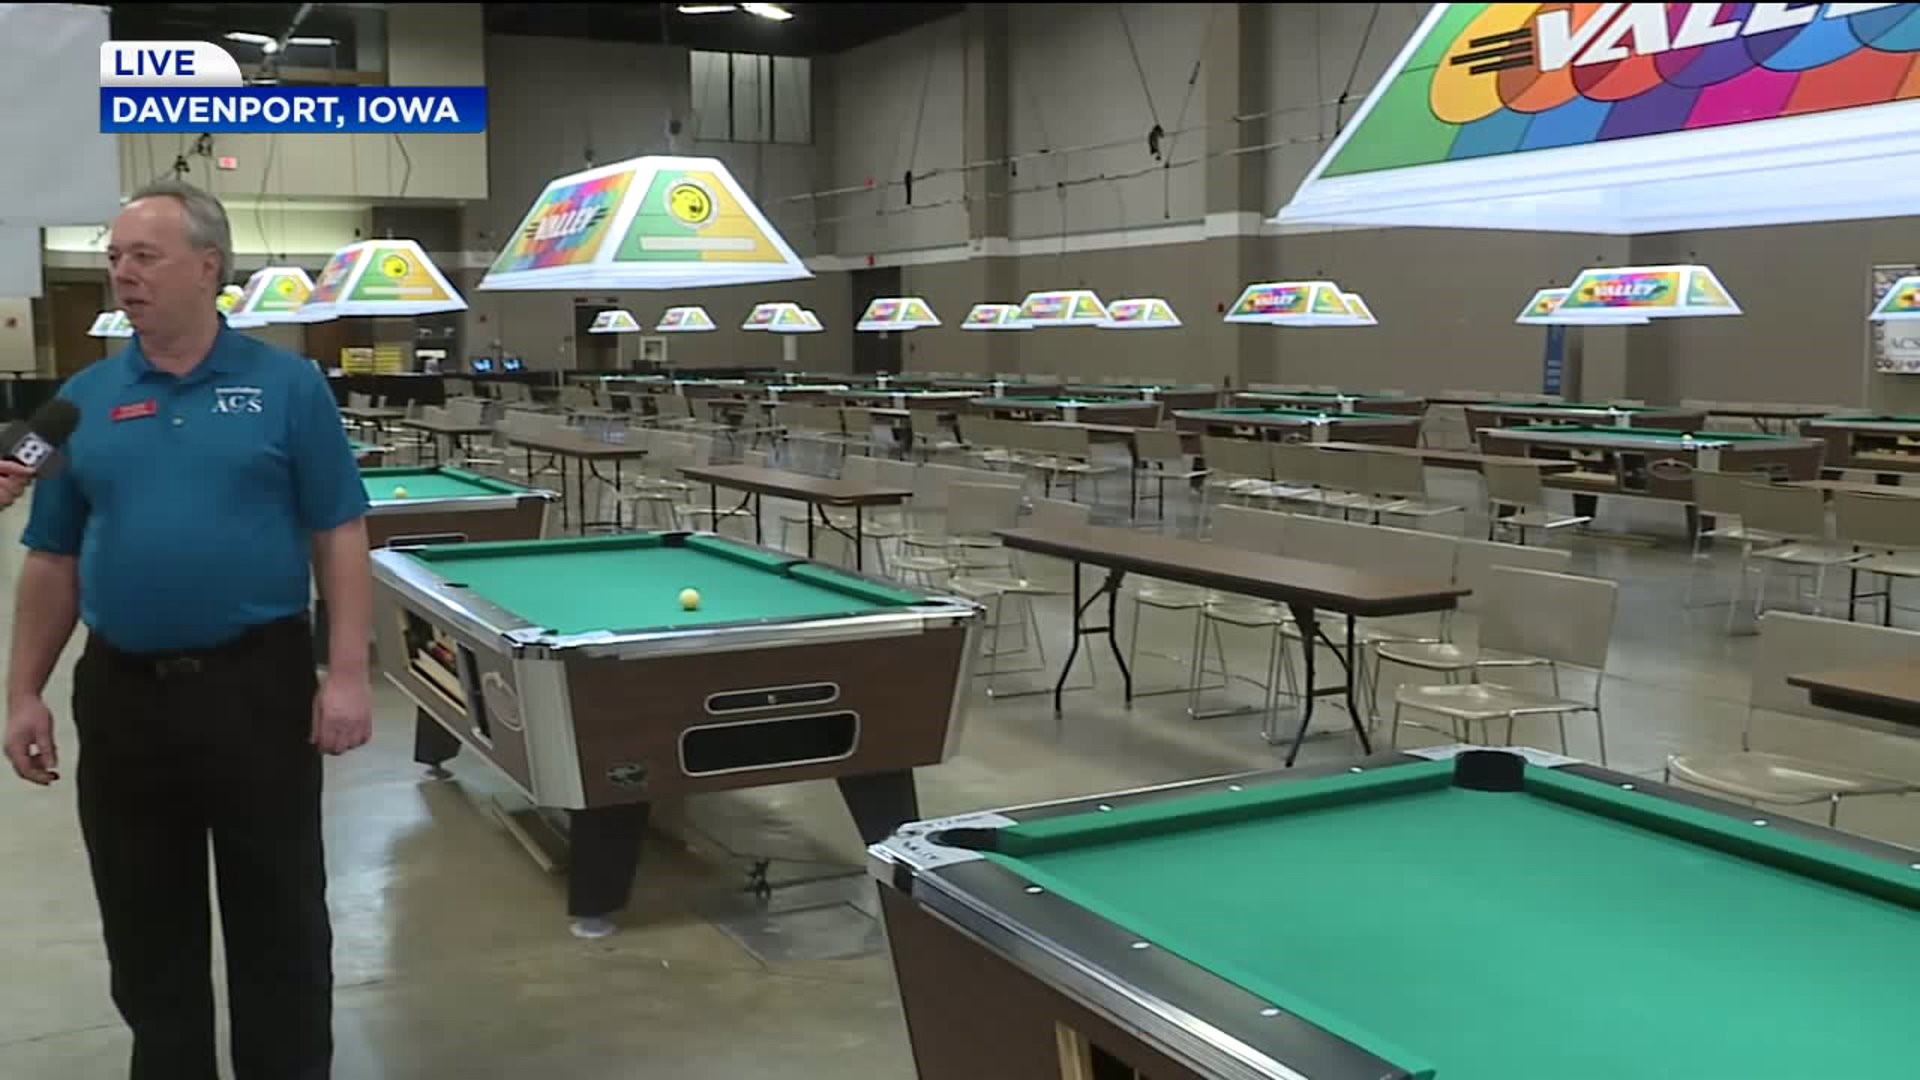 River Center transformed into a giant Pool Hall